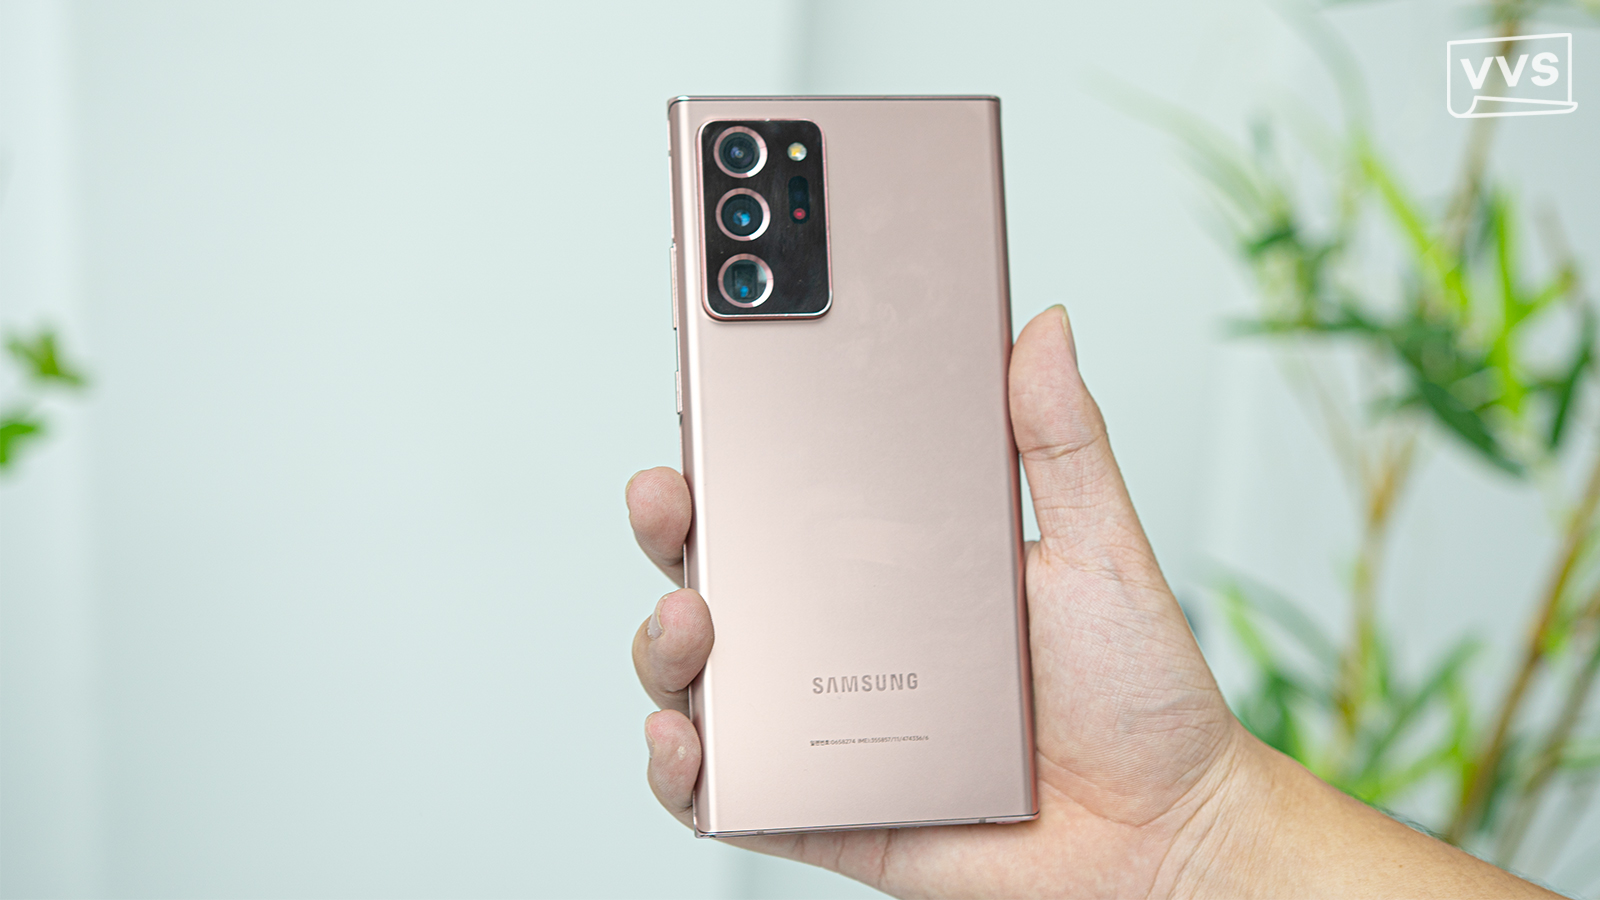 With the upgraded bokeh removal feature, your photos will become more realistic than ever. You can create unique and impressive photos with just a Samsung Note 20 phone.

(Note: The description emphasizes the ease of use and unique feature of Note 20 camera.)